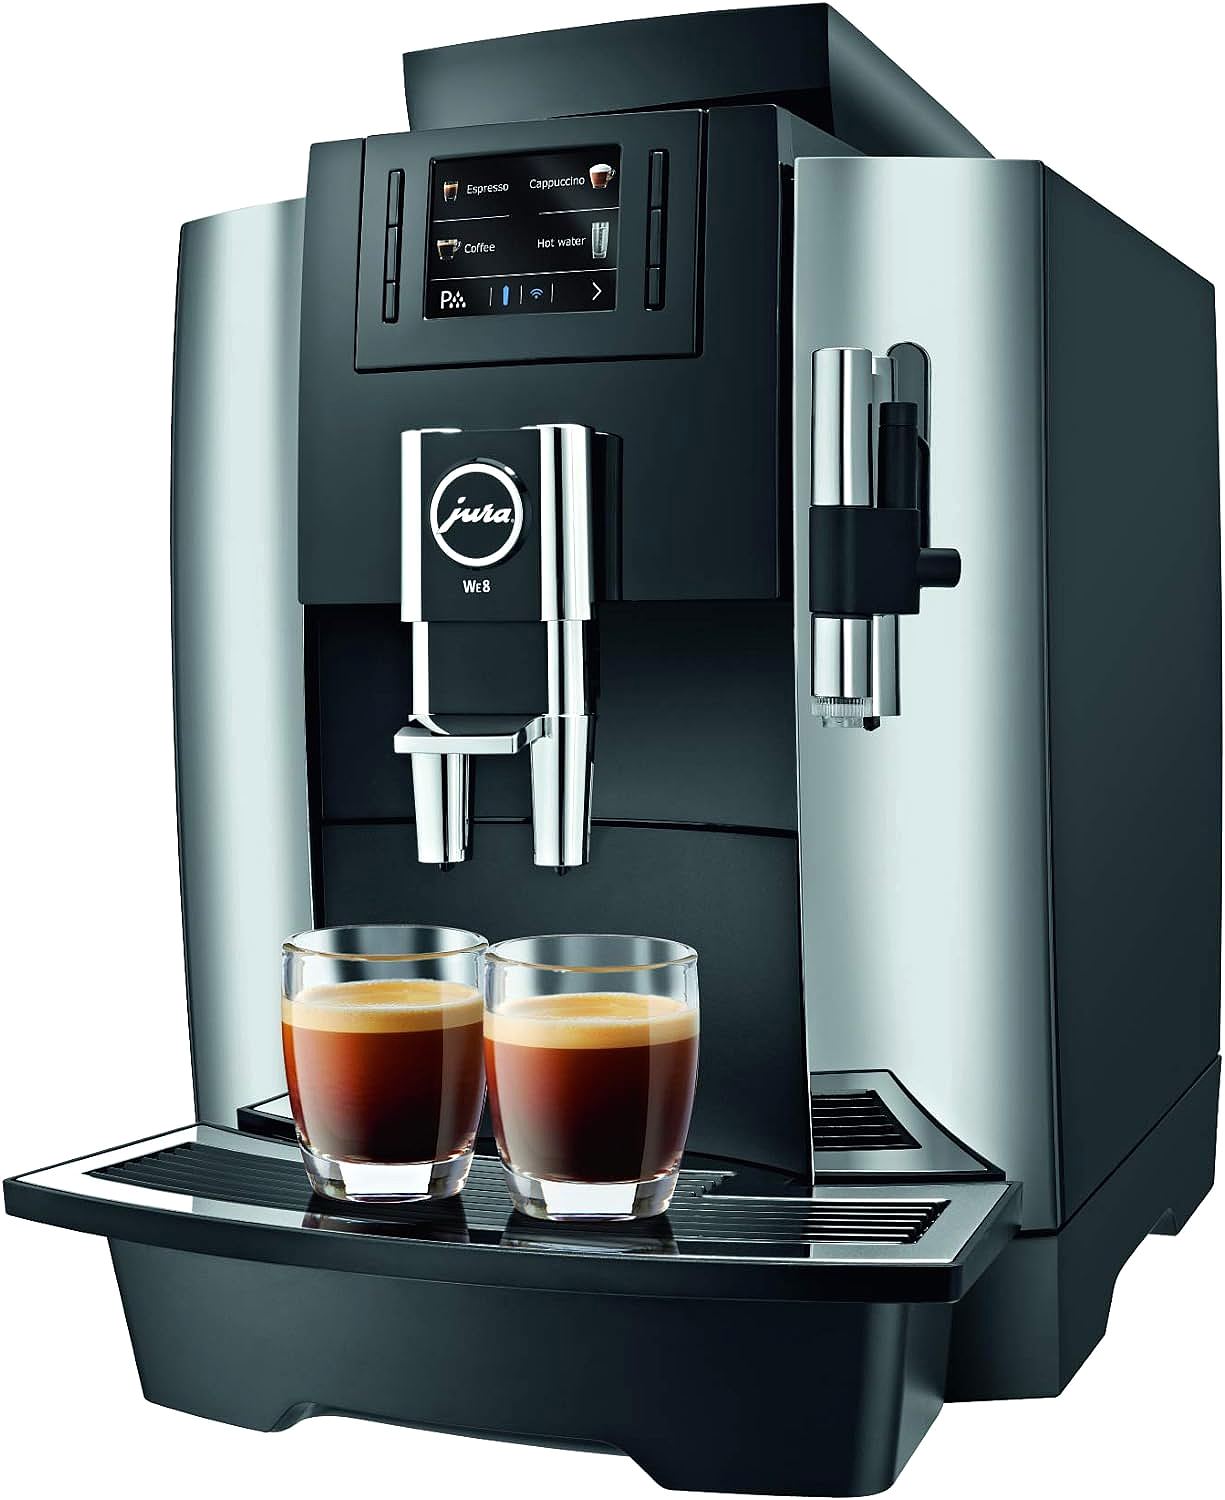 Jura 15145 WE8 Automatic Coffee Machine: The Ideal Office Coffee Solution